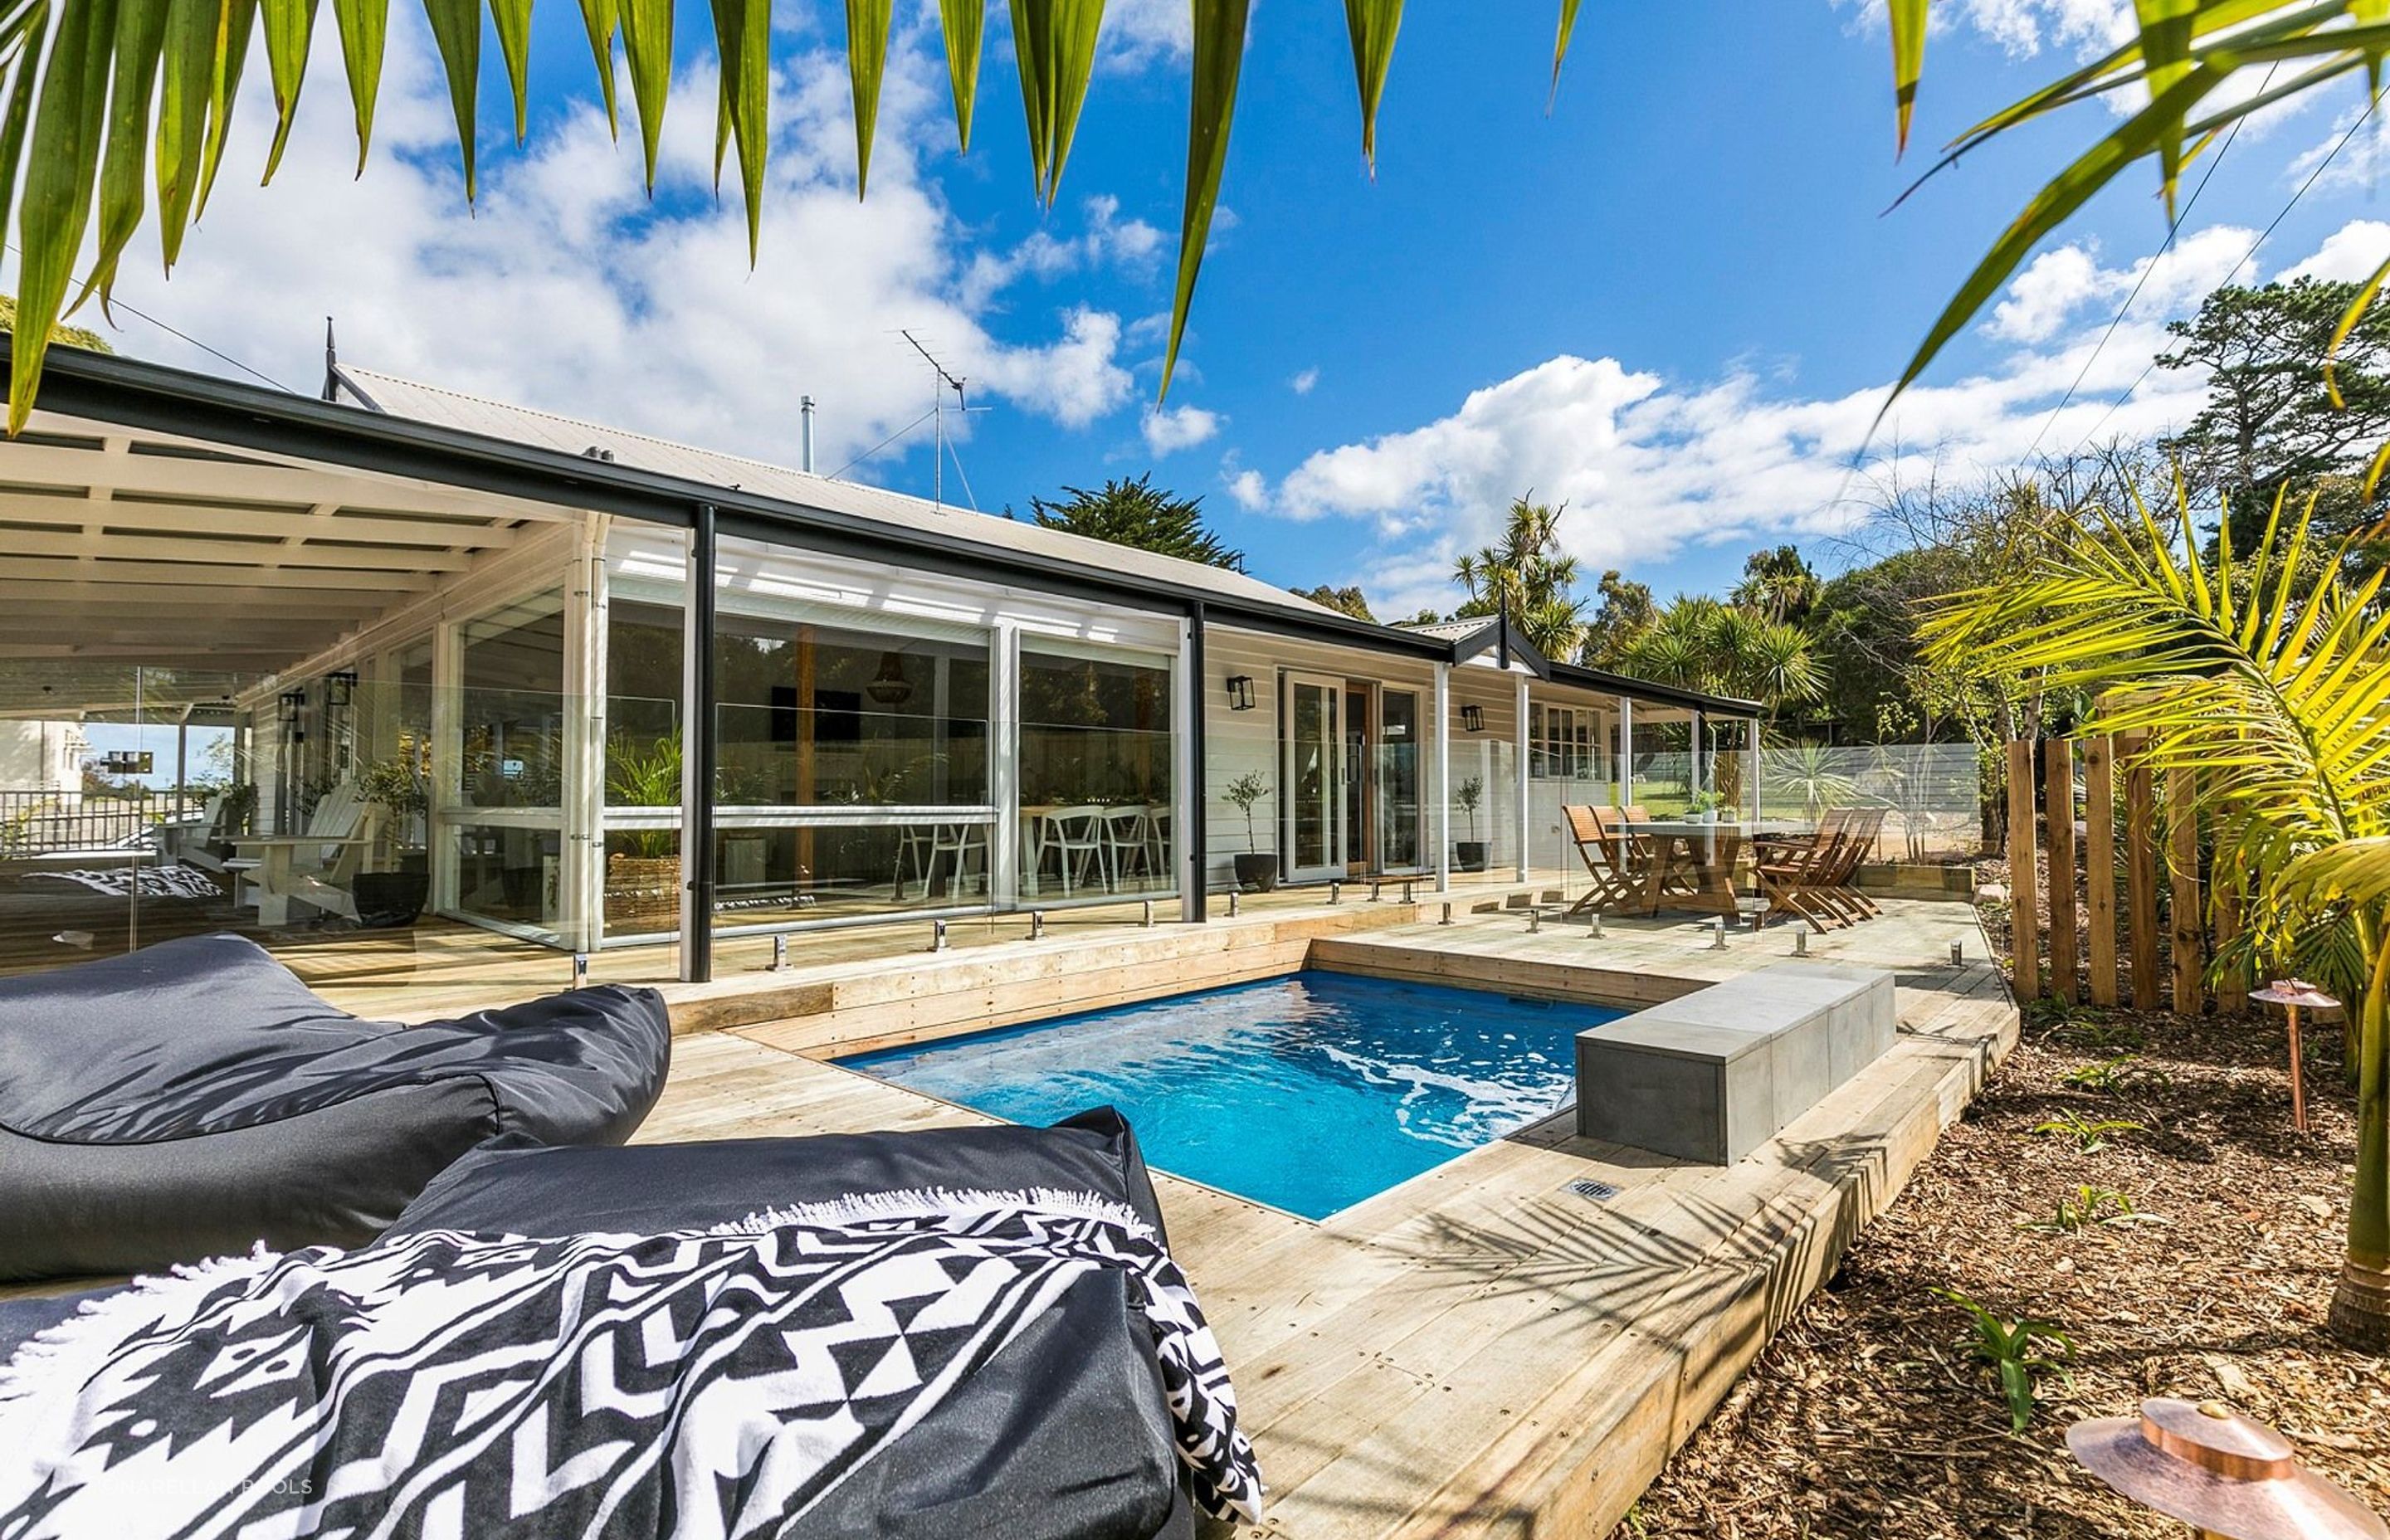 The Eden Plunge Pool from Narellan Pools easily fits into an outdoor space.